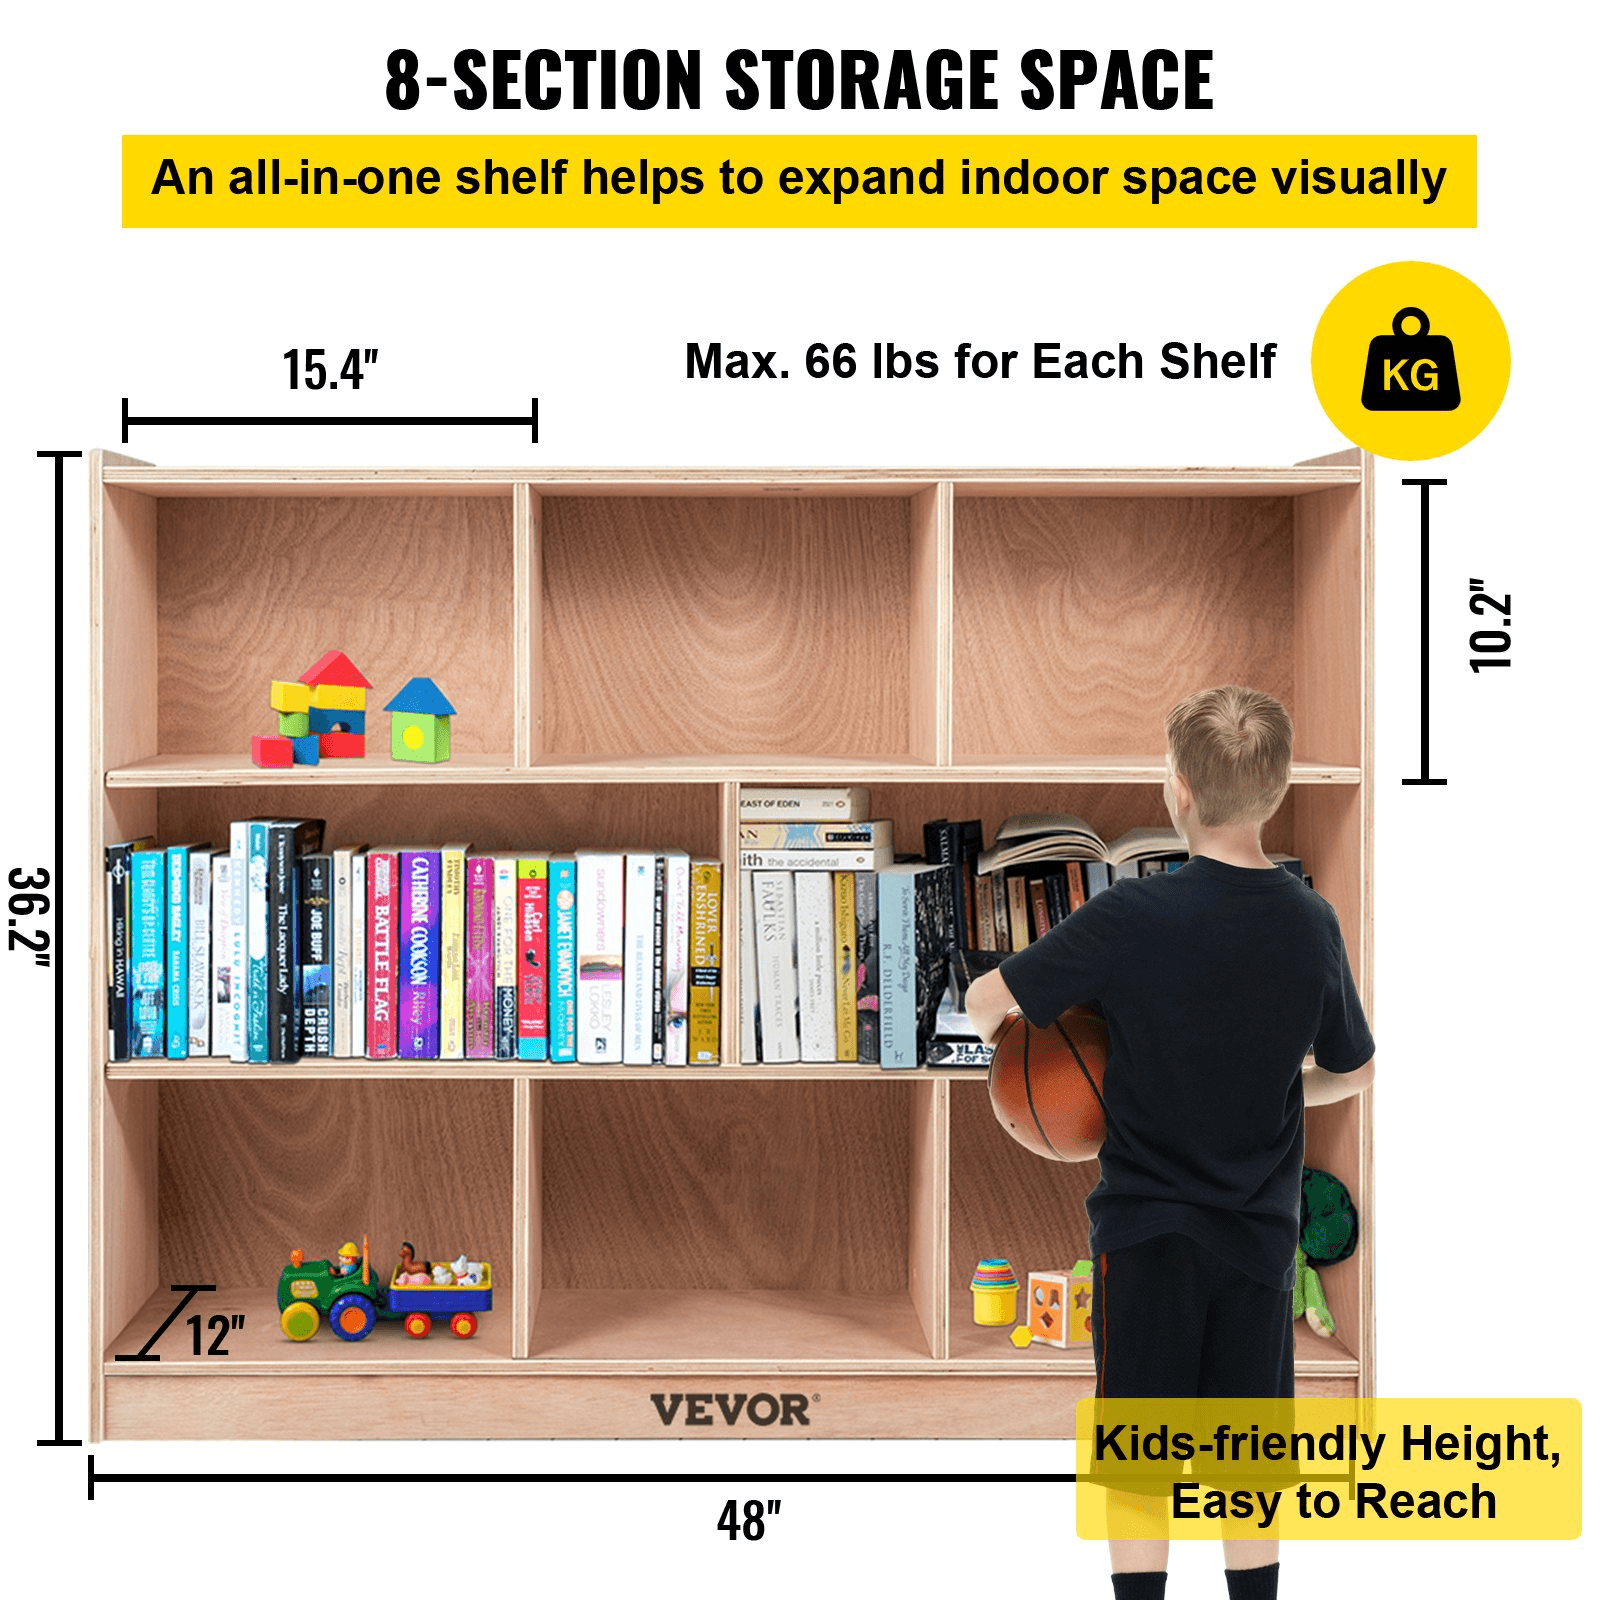 VEVOR Classroom Storage Cabinet Plywood 8-Section Preschool Storage Shelves 36 Inch High Classroom Cabinet Storage with Casters - Loomini